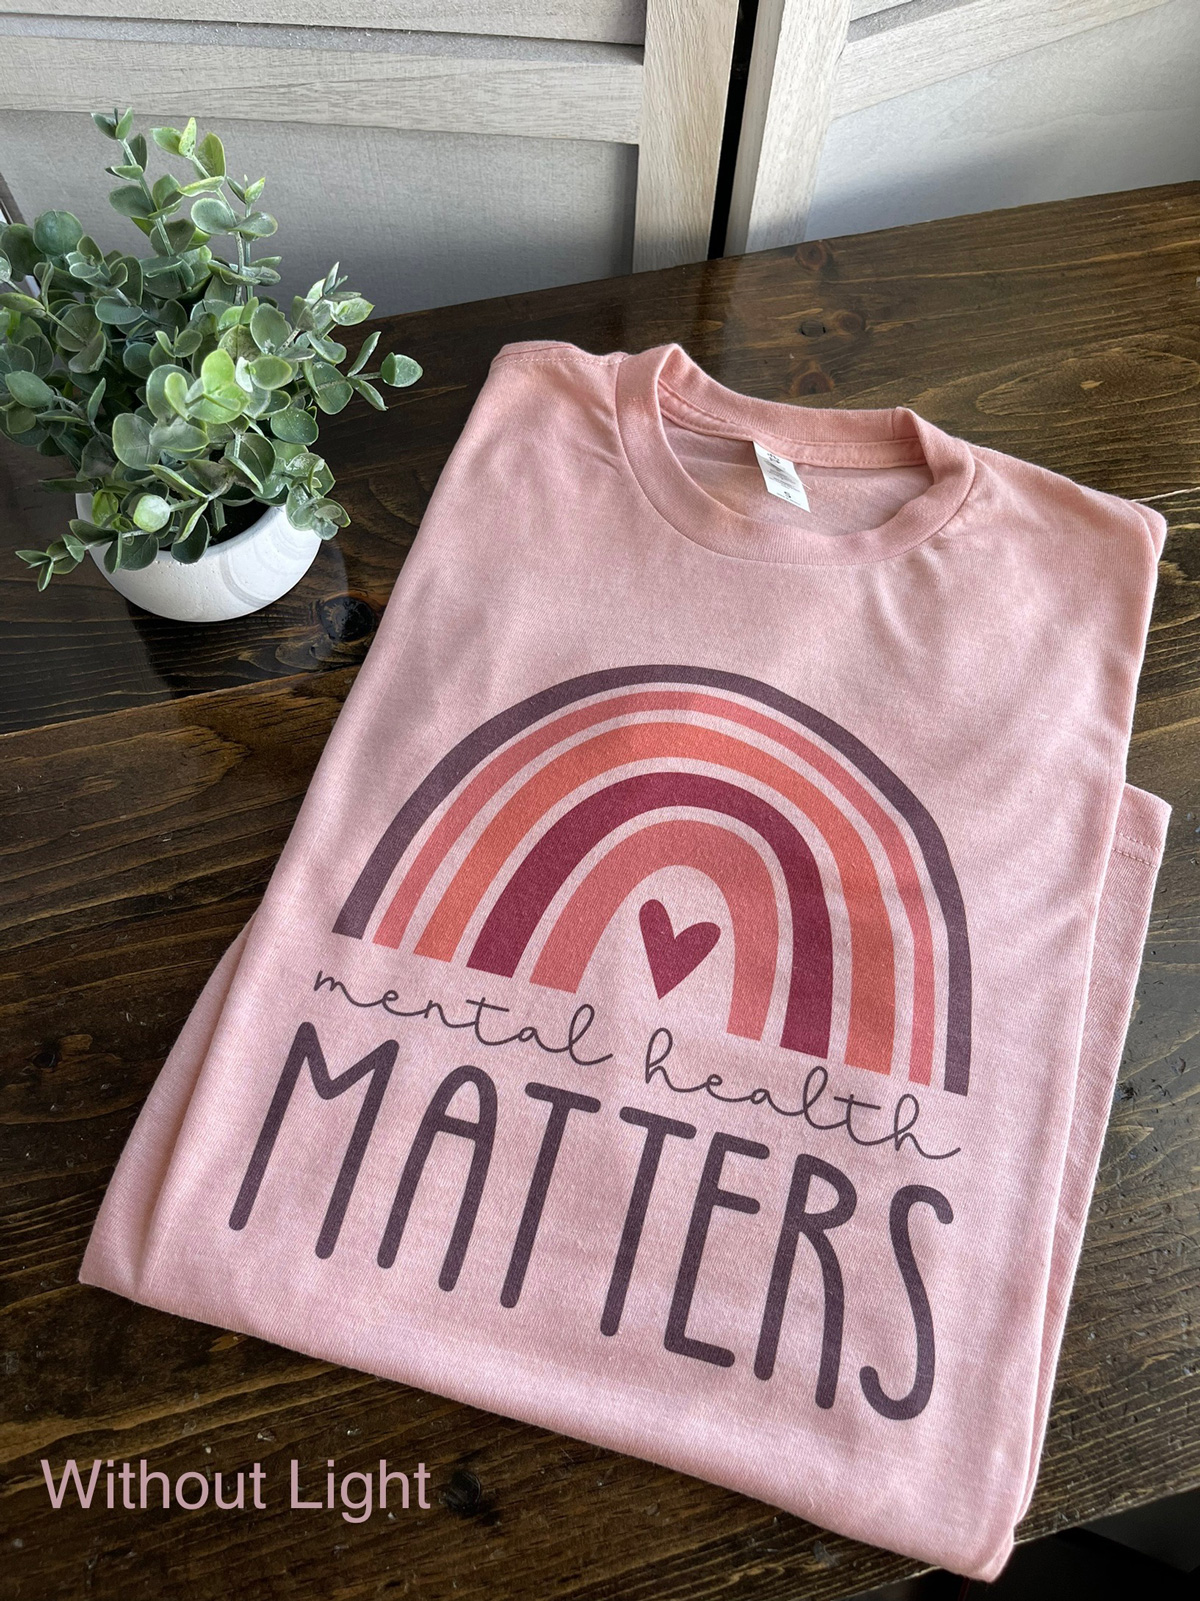 How to make a shirt with Cricut - Learn to create beautiful things